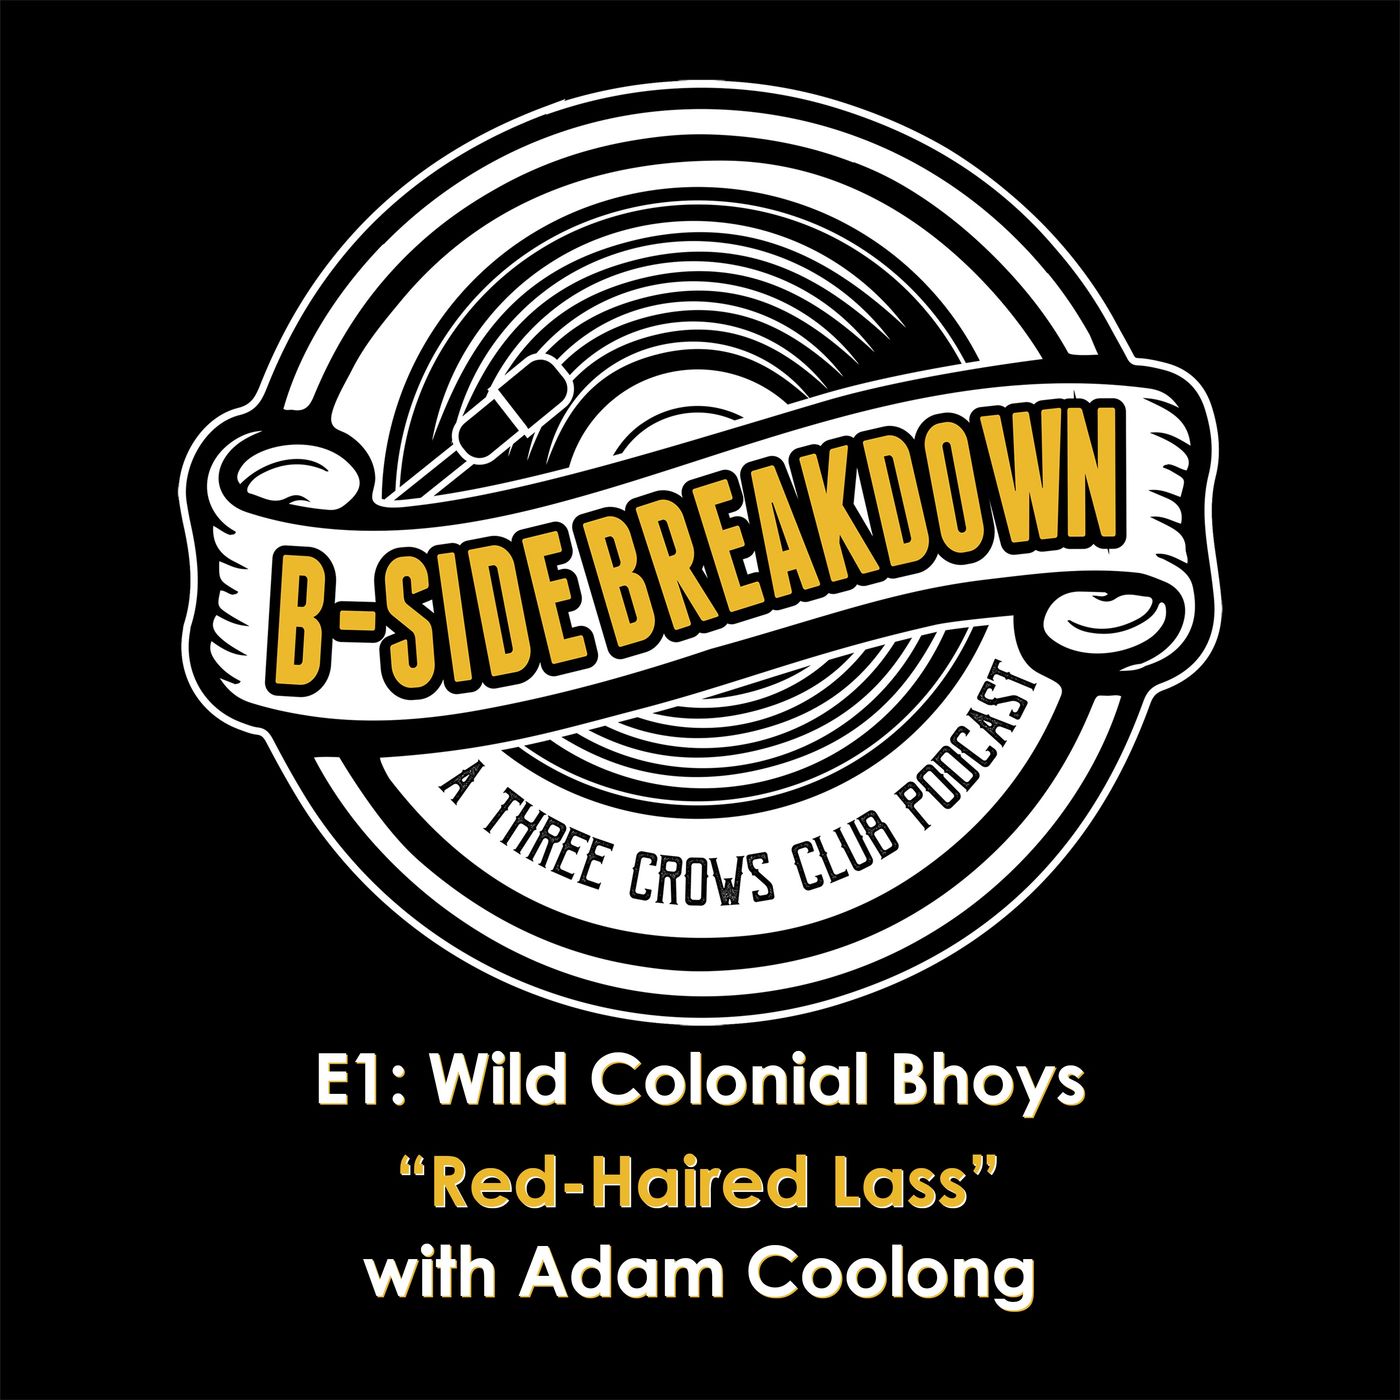 E1: "Red-Haired Lass" by Wild Colonial Bhoys with Adam Coolong